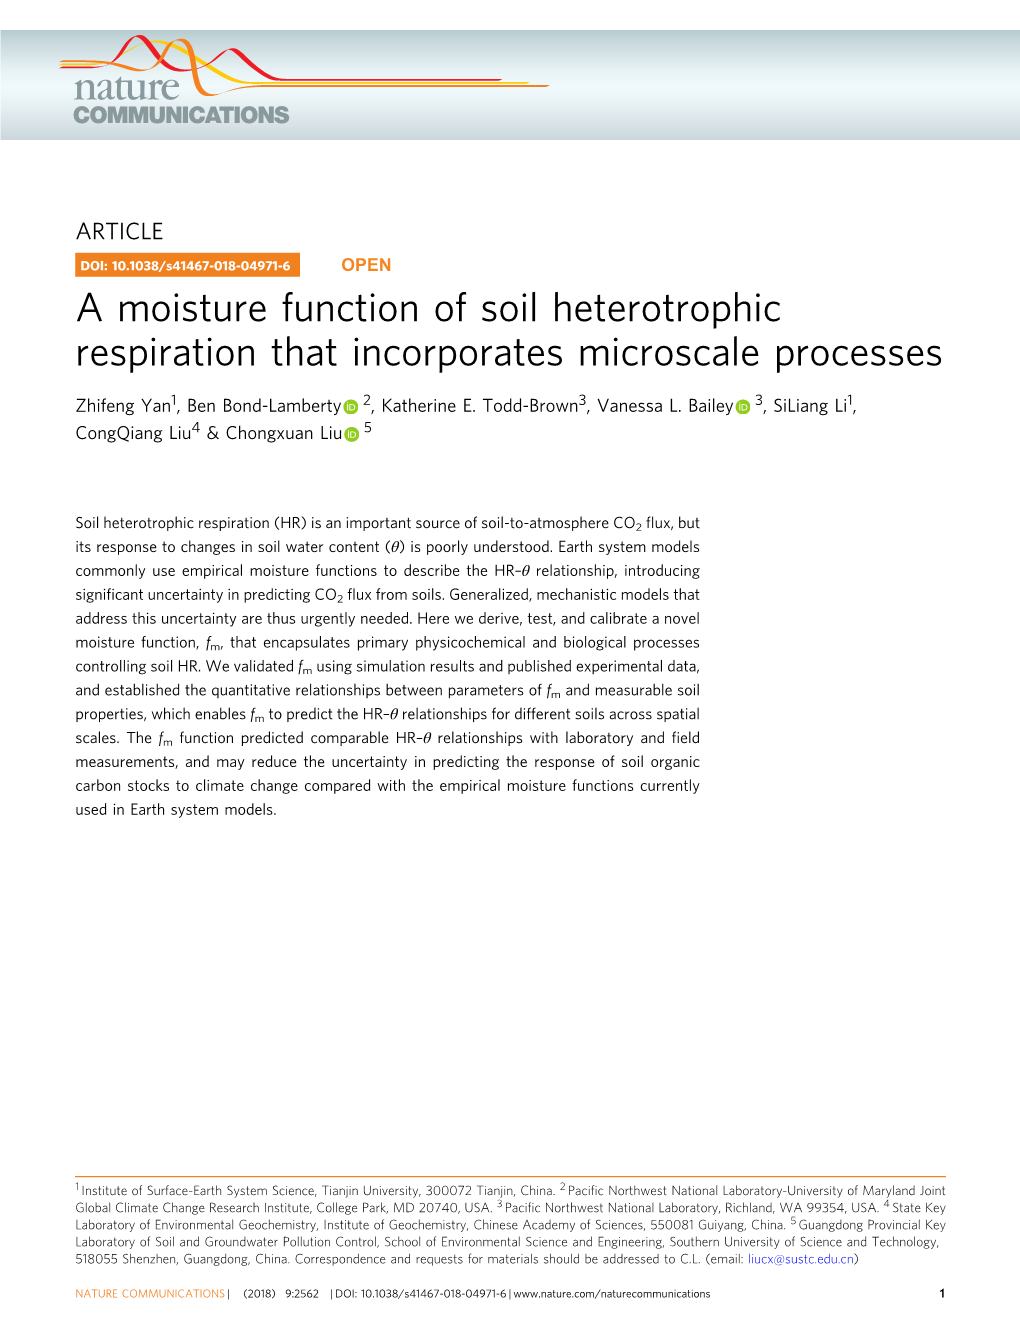 A Moisture Function of Soil Heterotrophic Respiration That Incorporates Microscale Processes